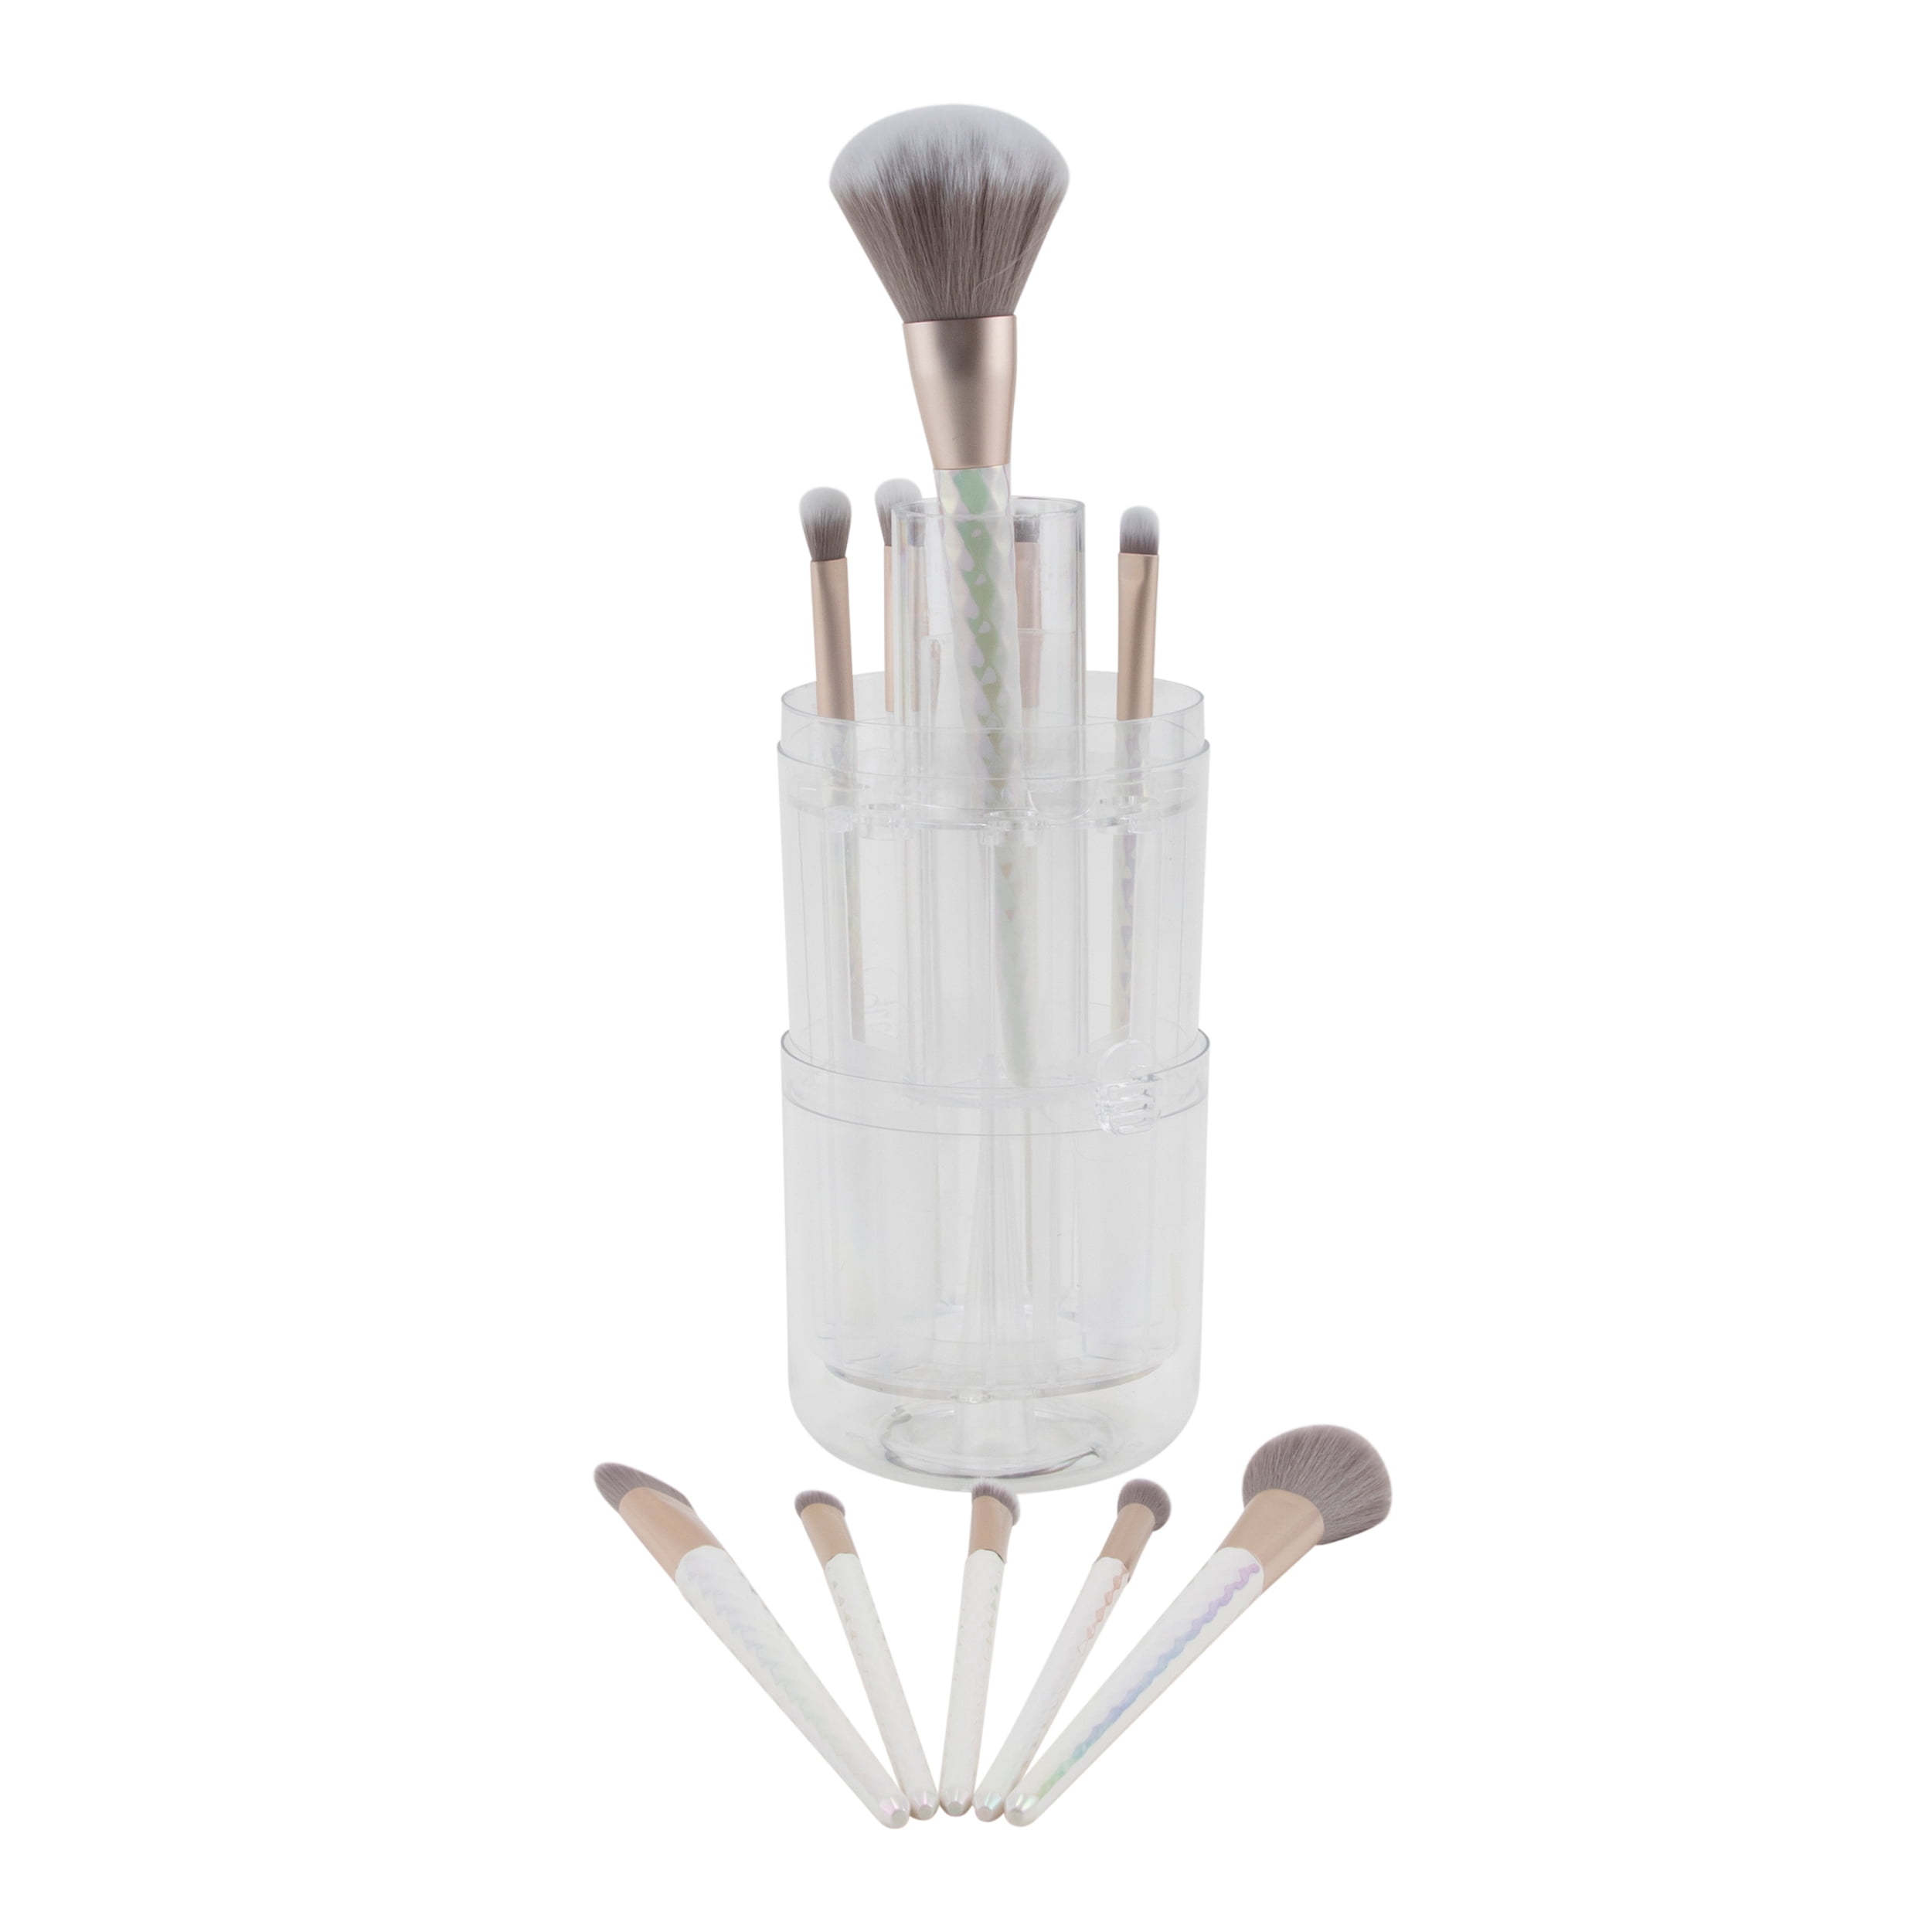 Candie Couture 10 Piece Makeup Brush Set